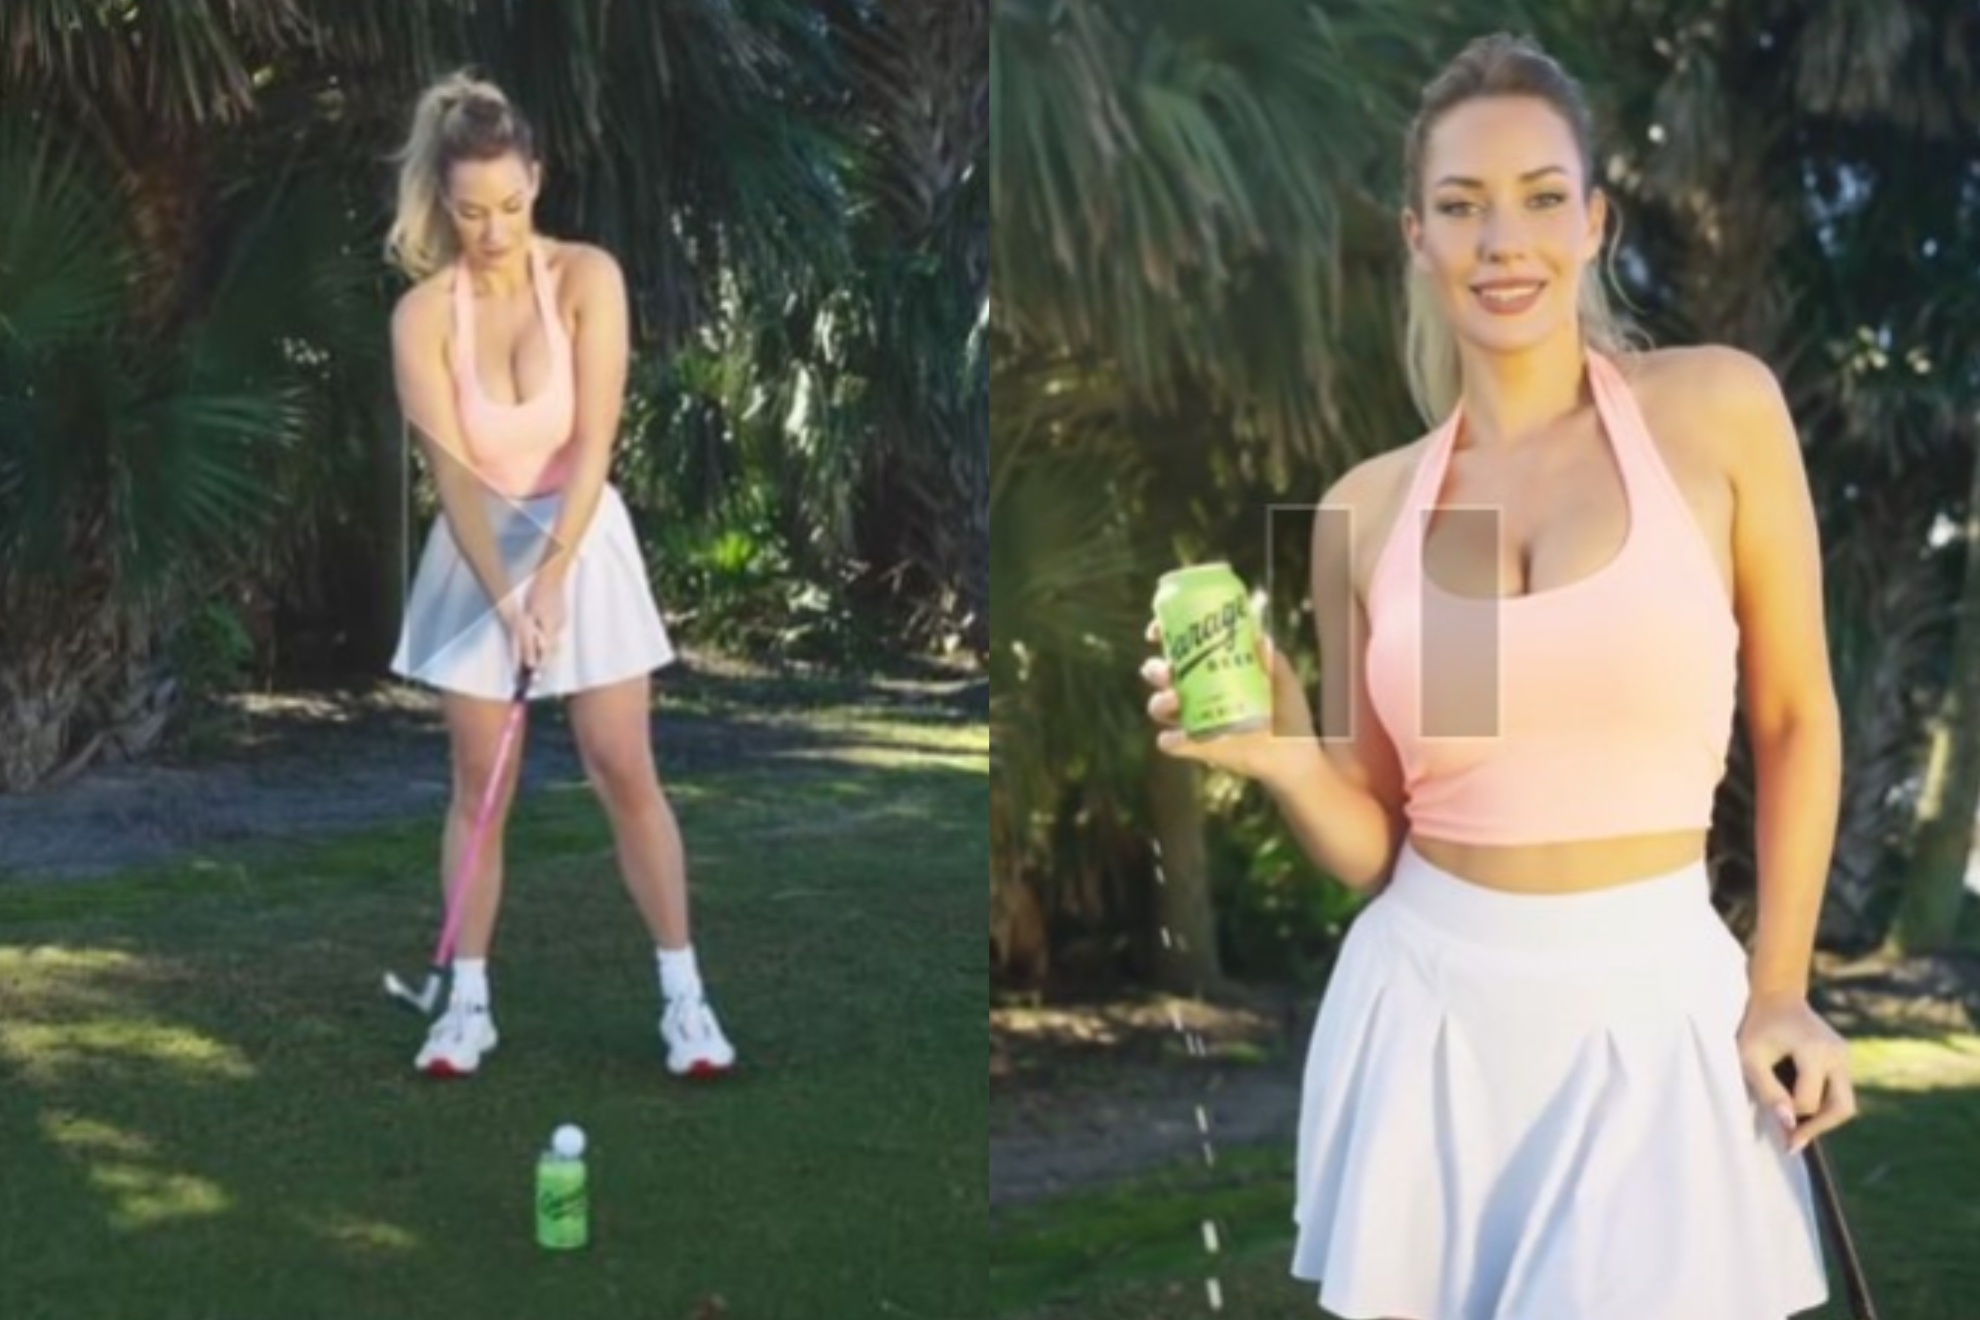 Paige Spiranac posted a video of herself hitting a ball on top of a beer can on her Instagram stories